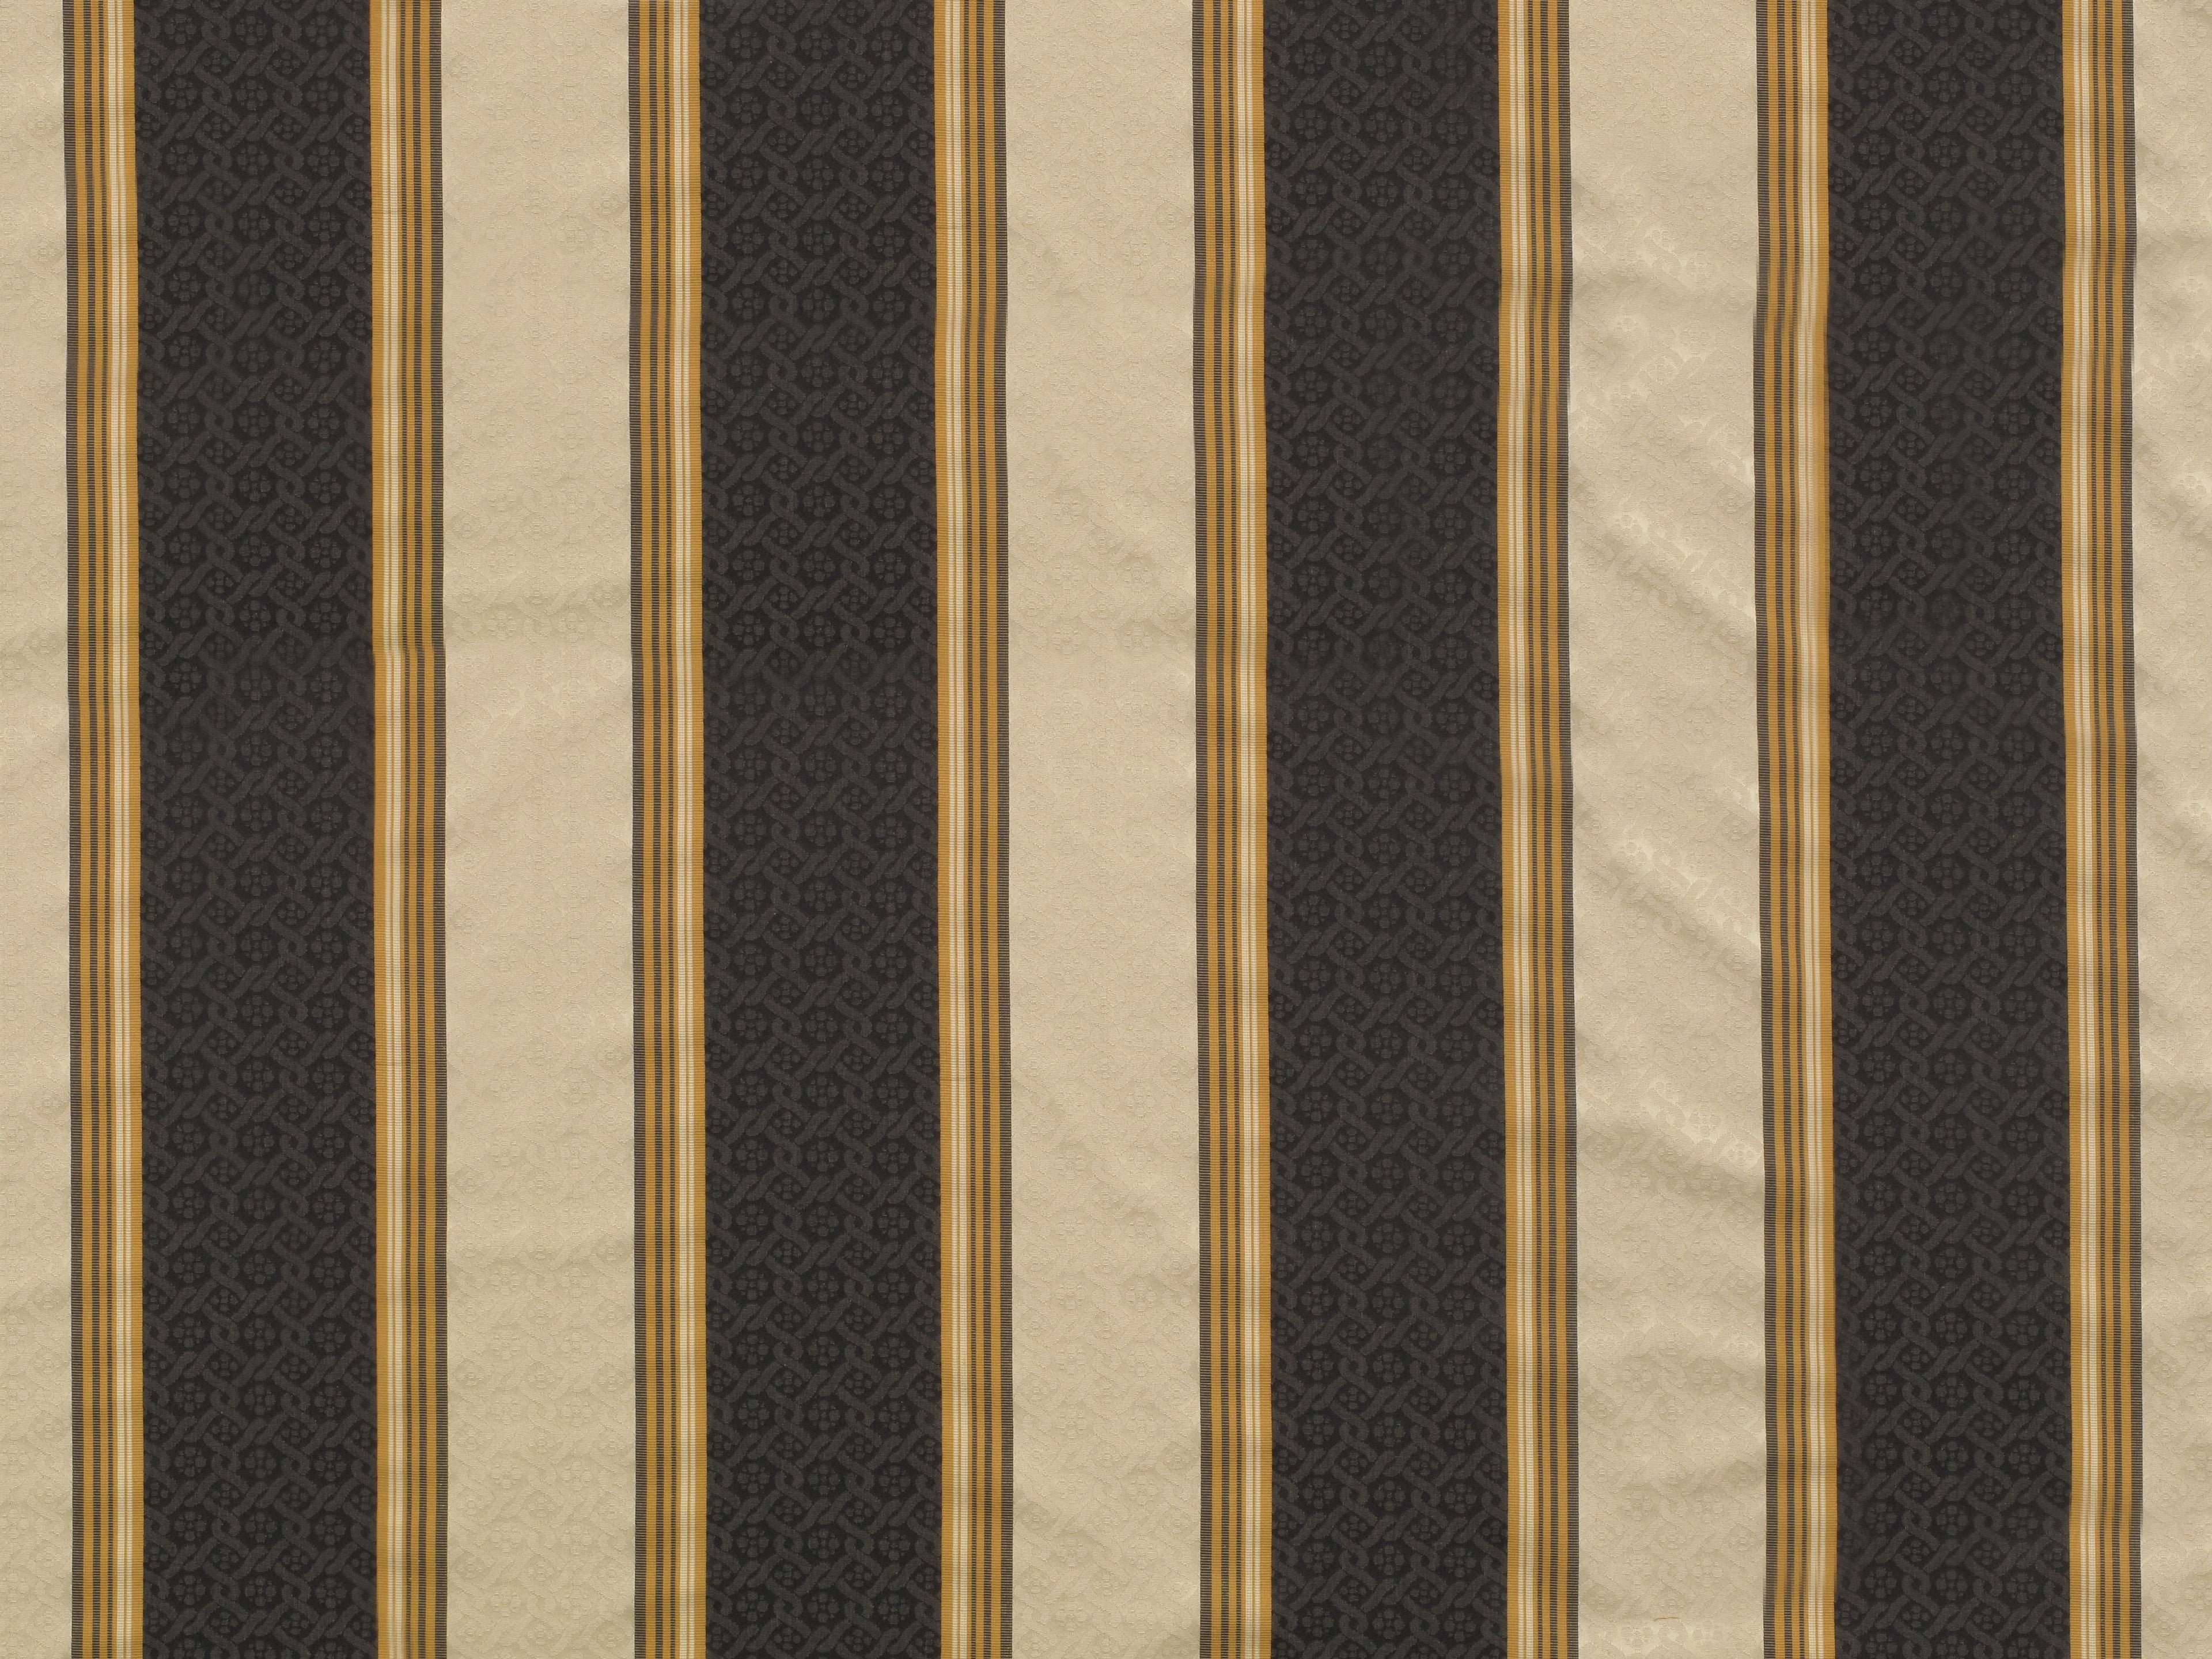 Potenza fabric in chocolate color - pattern number M0 00051424 - by Scalamandre in the Old World Weavers collection